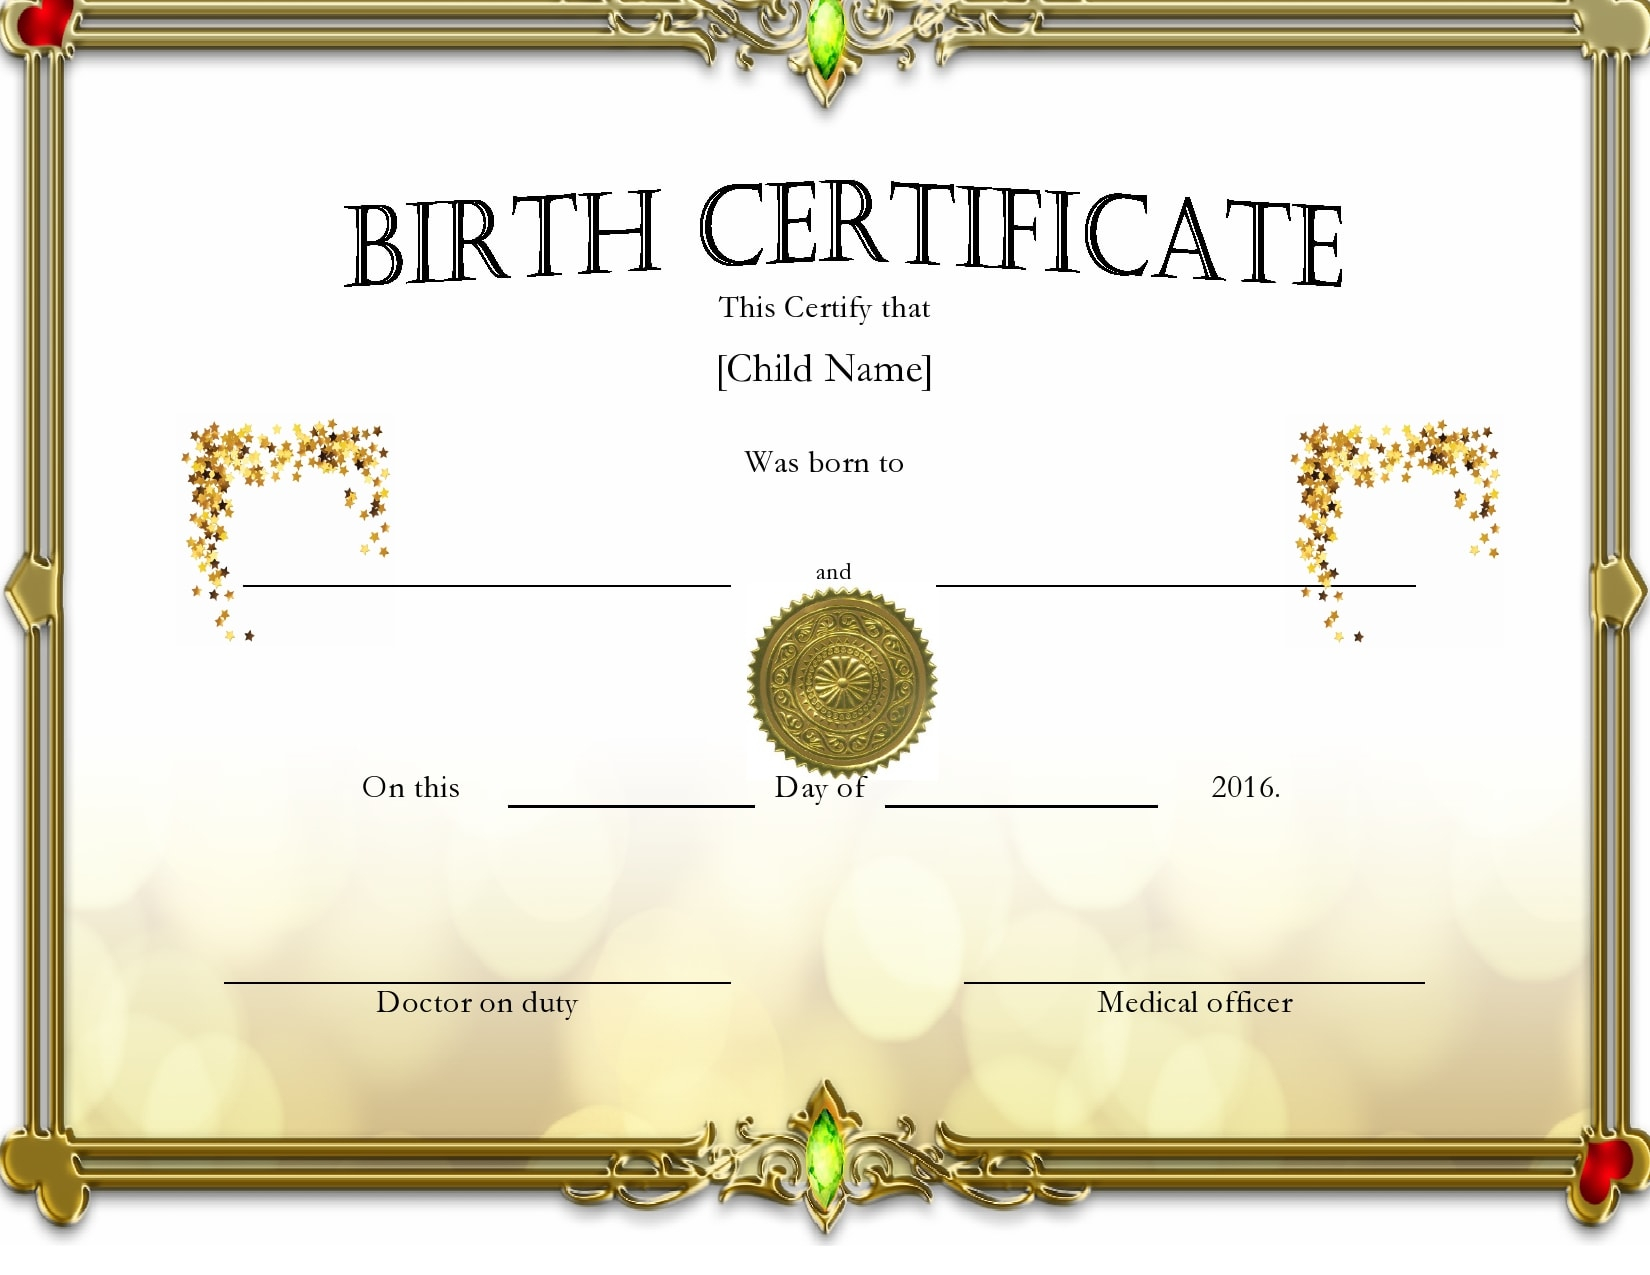 10 Blank Birth Certificate Templates (& Examples) - PrintableTemplates Pertaining To Girl Birth Certificate Template